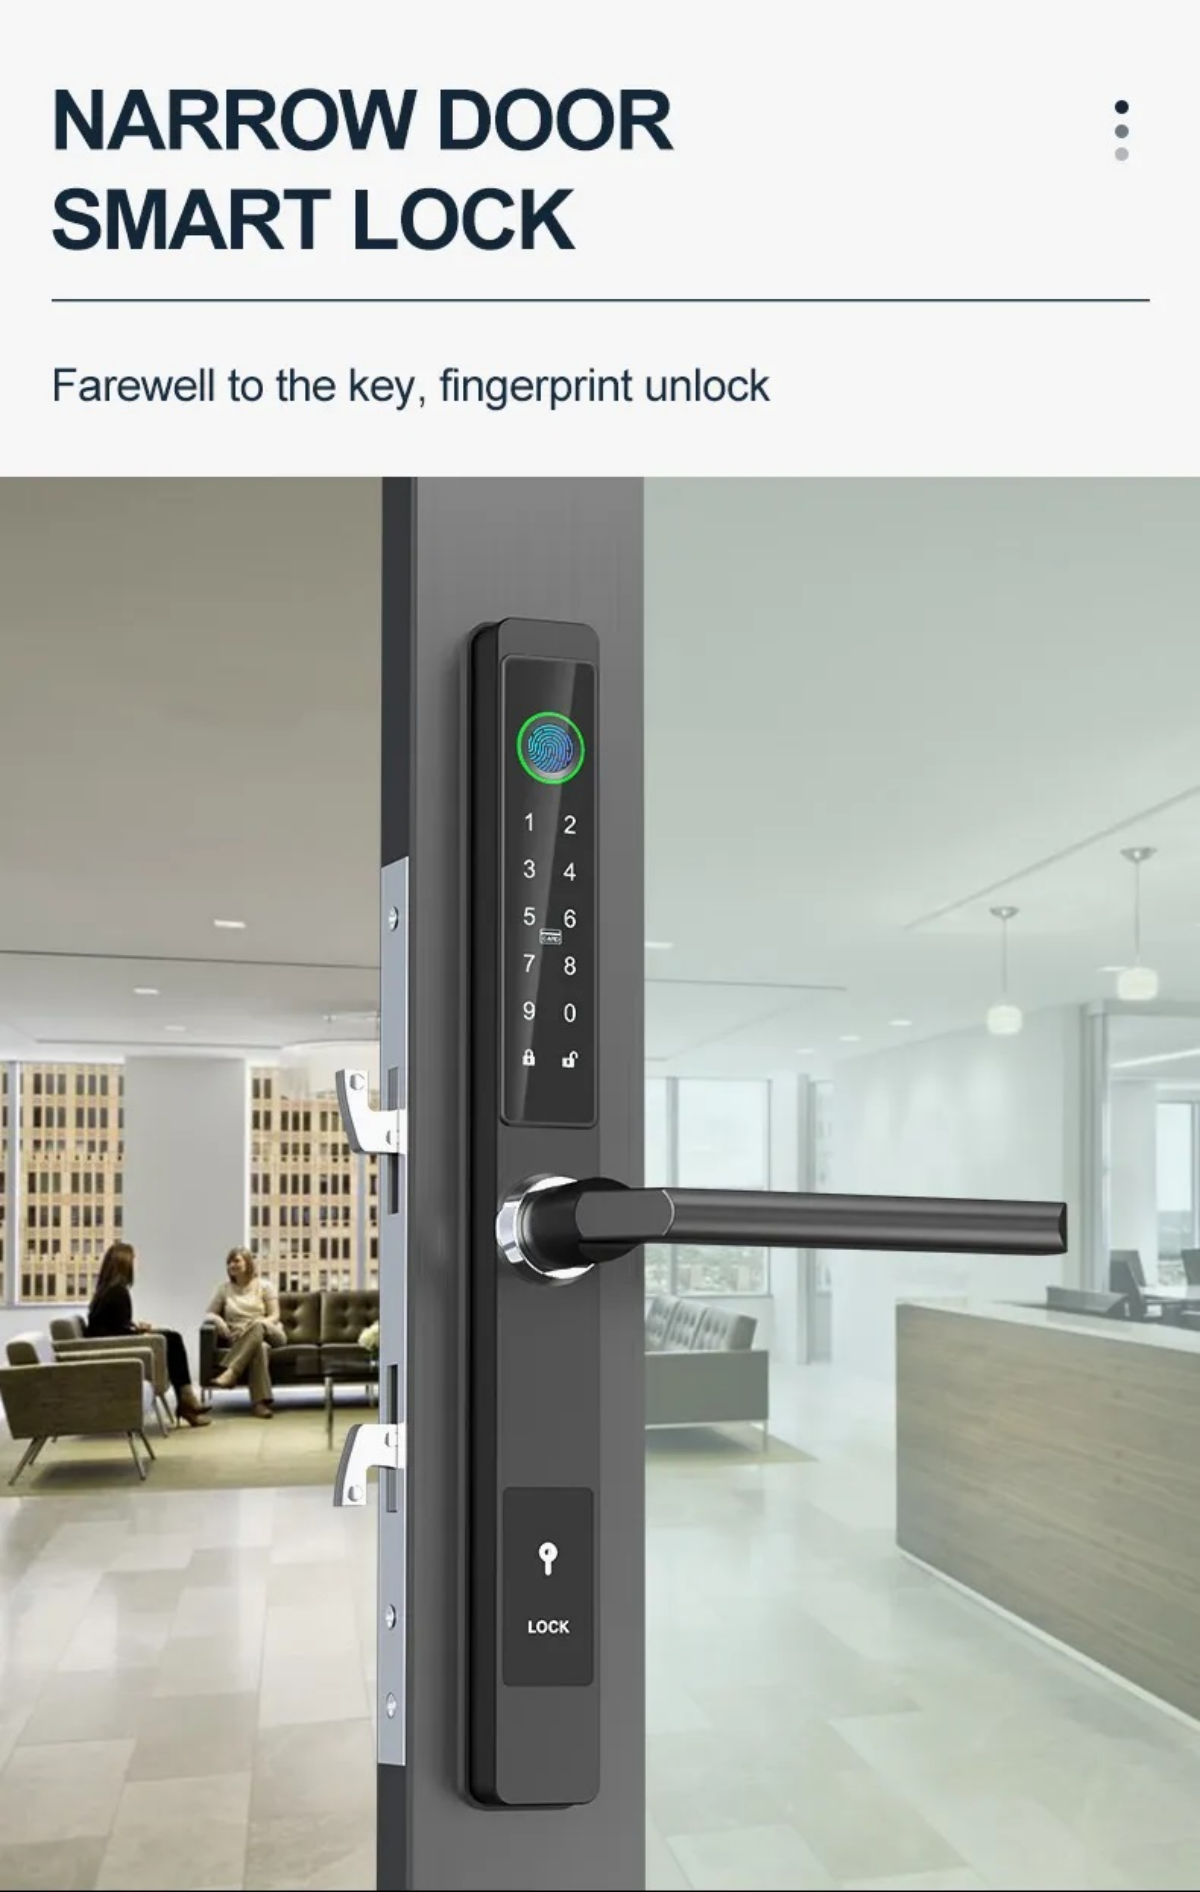 Unboxed: The DB2S Smart Door Lock by Alfred